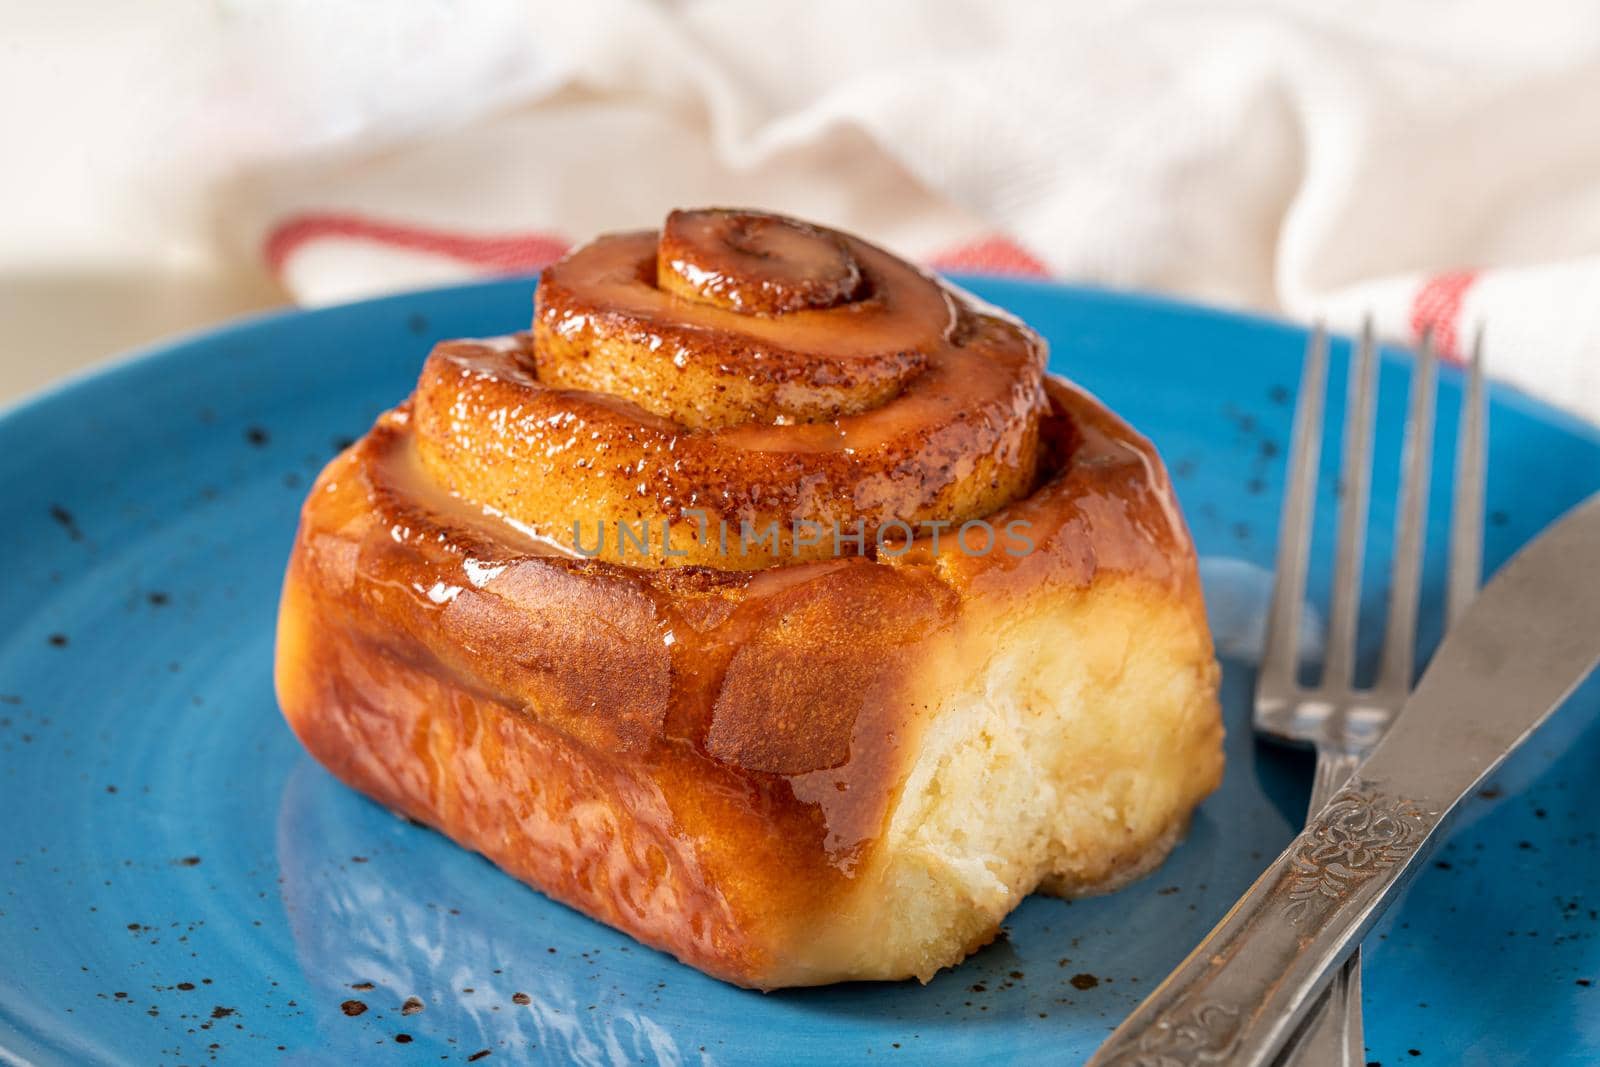 Freshly baked cinnamon roll on a blue porcelain plate by Sonat